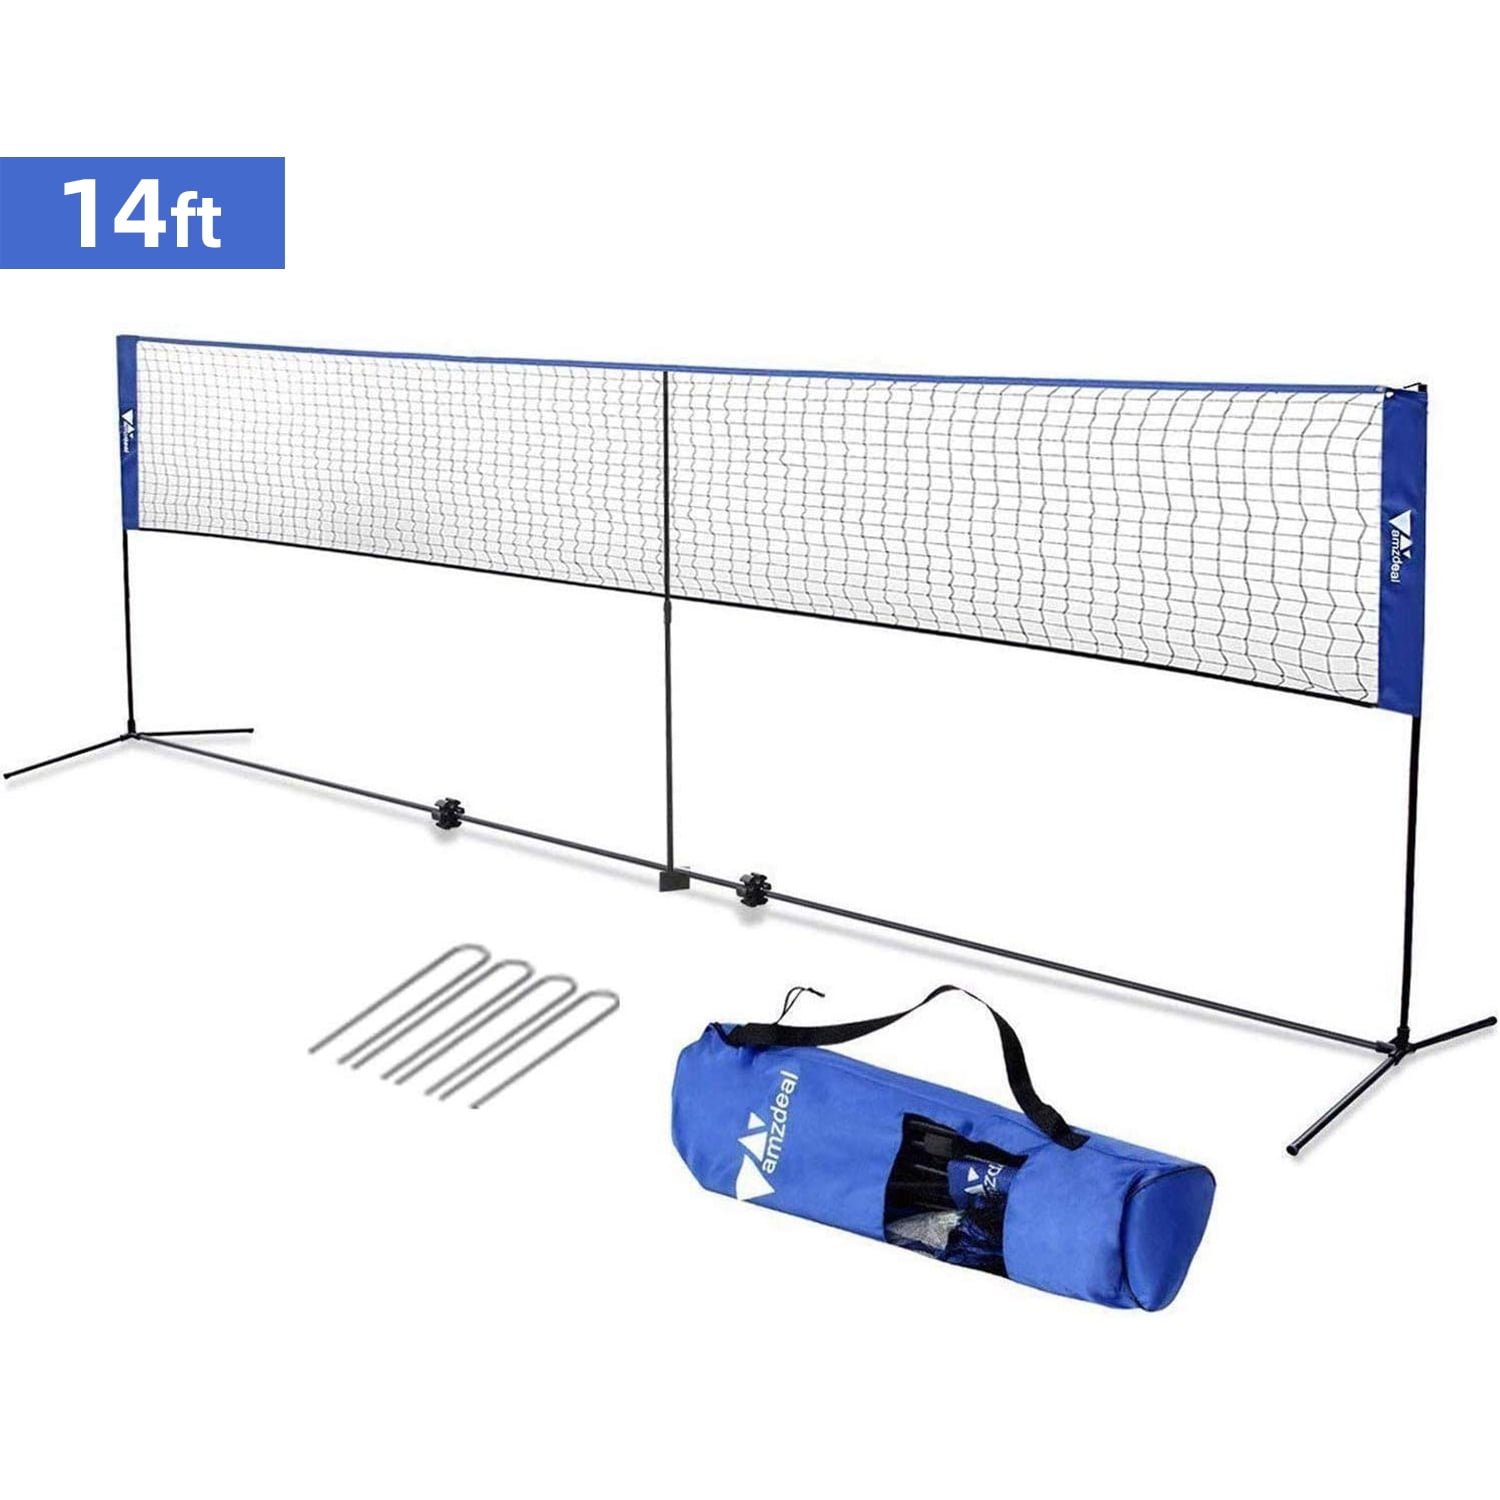 3.1m Adjustable Badminton Net for Garden Volleyball Net Foldable Badminton Tennis Net Adult Kids Badminton Net Outdoor for Competition Training Badminton Set With Net Carring Bag 10 FT x 2.5 FT 